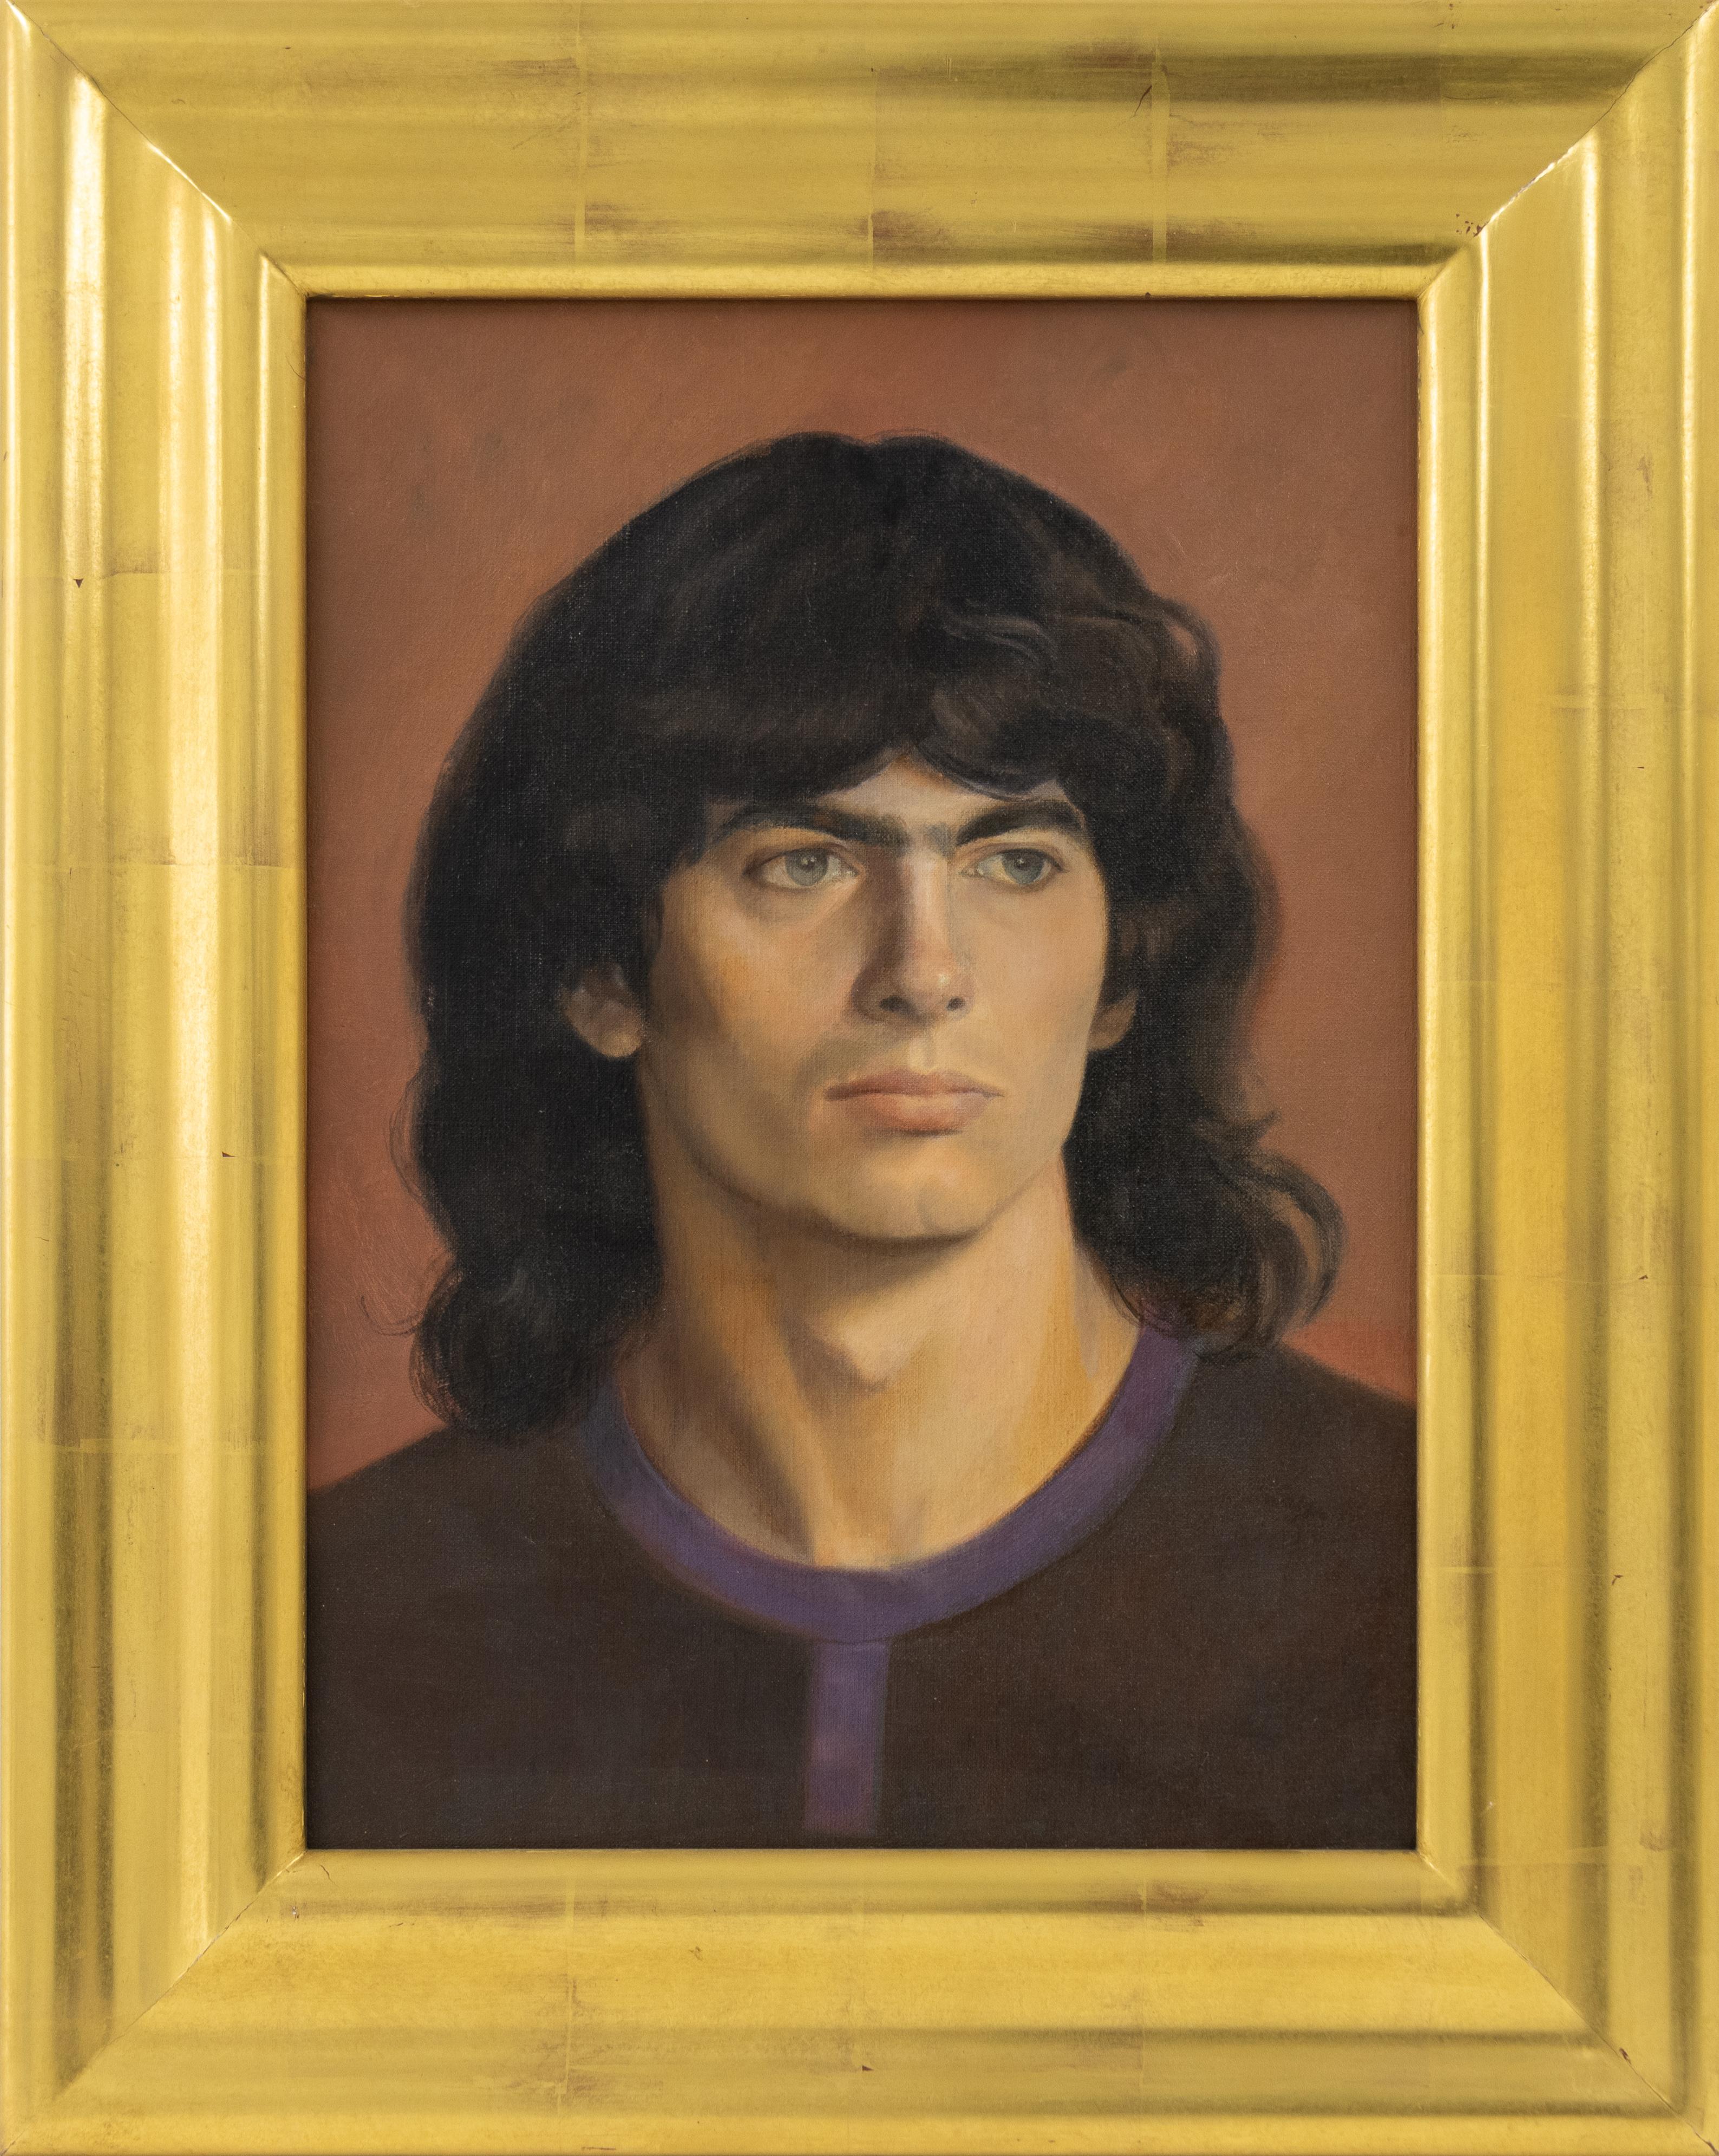 James Childs Figurative Painting - Portrait of a Long-Haired Man (Raymond Zimmerman)